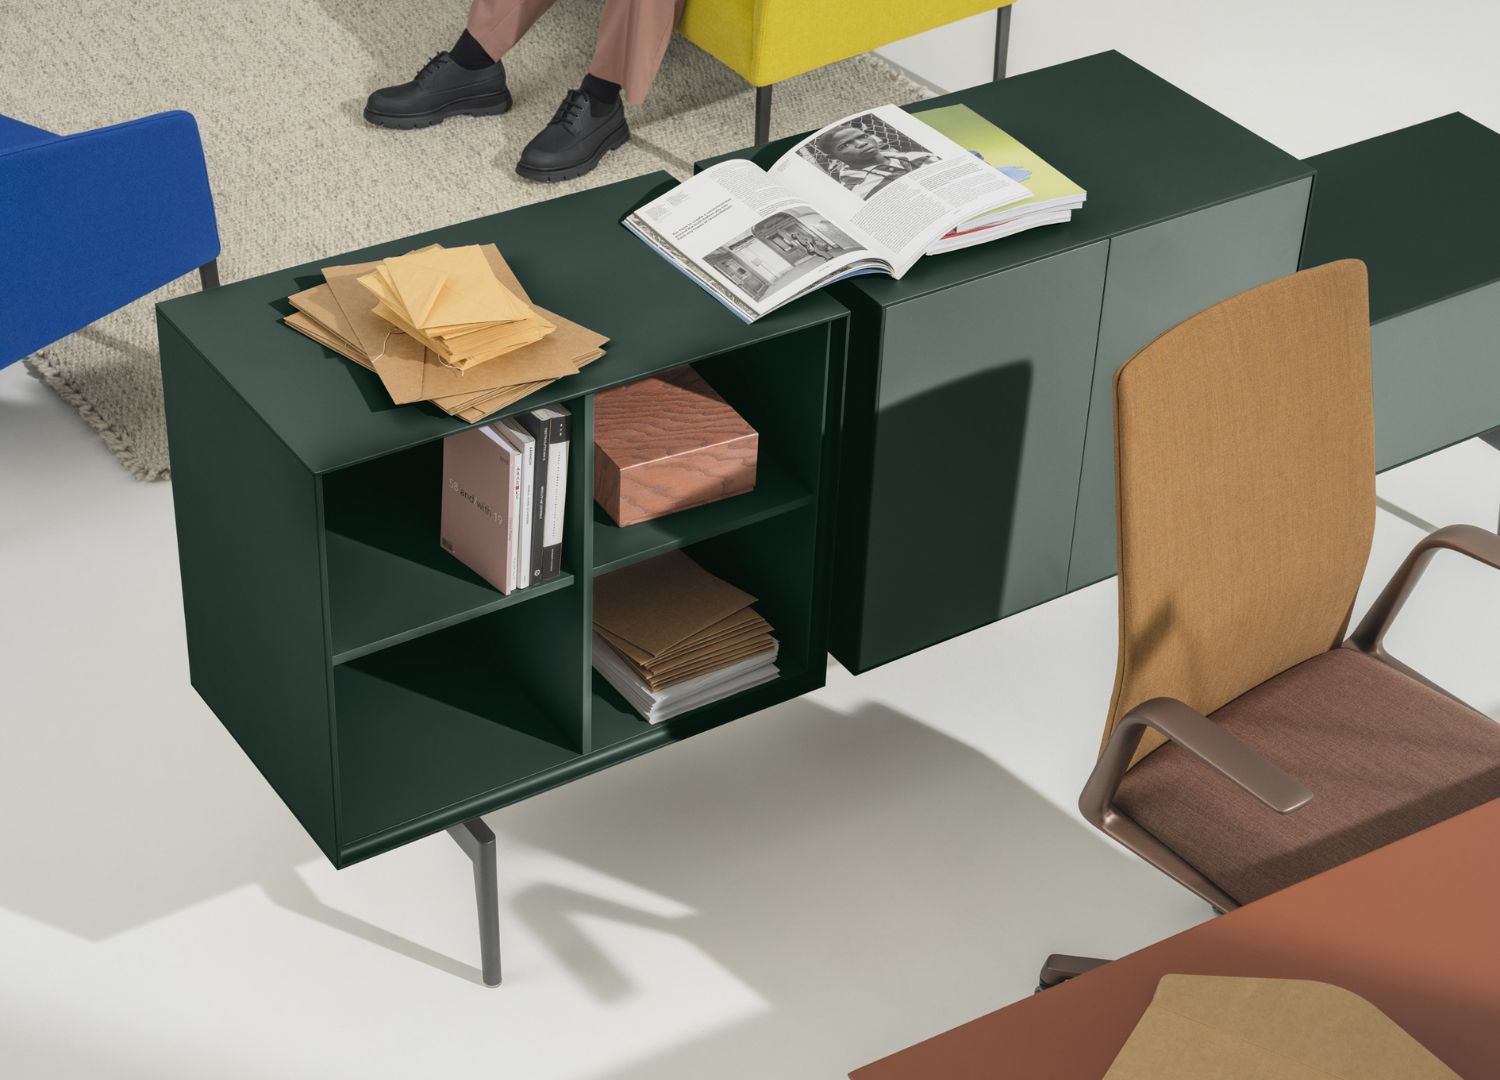 Semiton furniture collection by Arper _ a system built with flexibility in mind